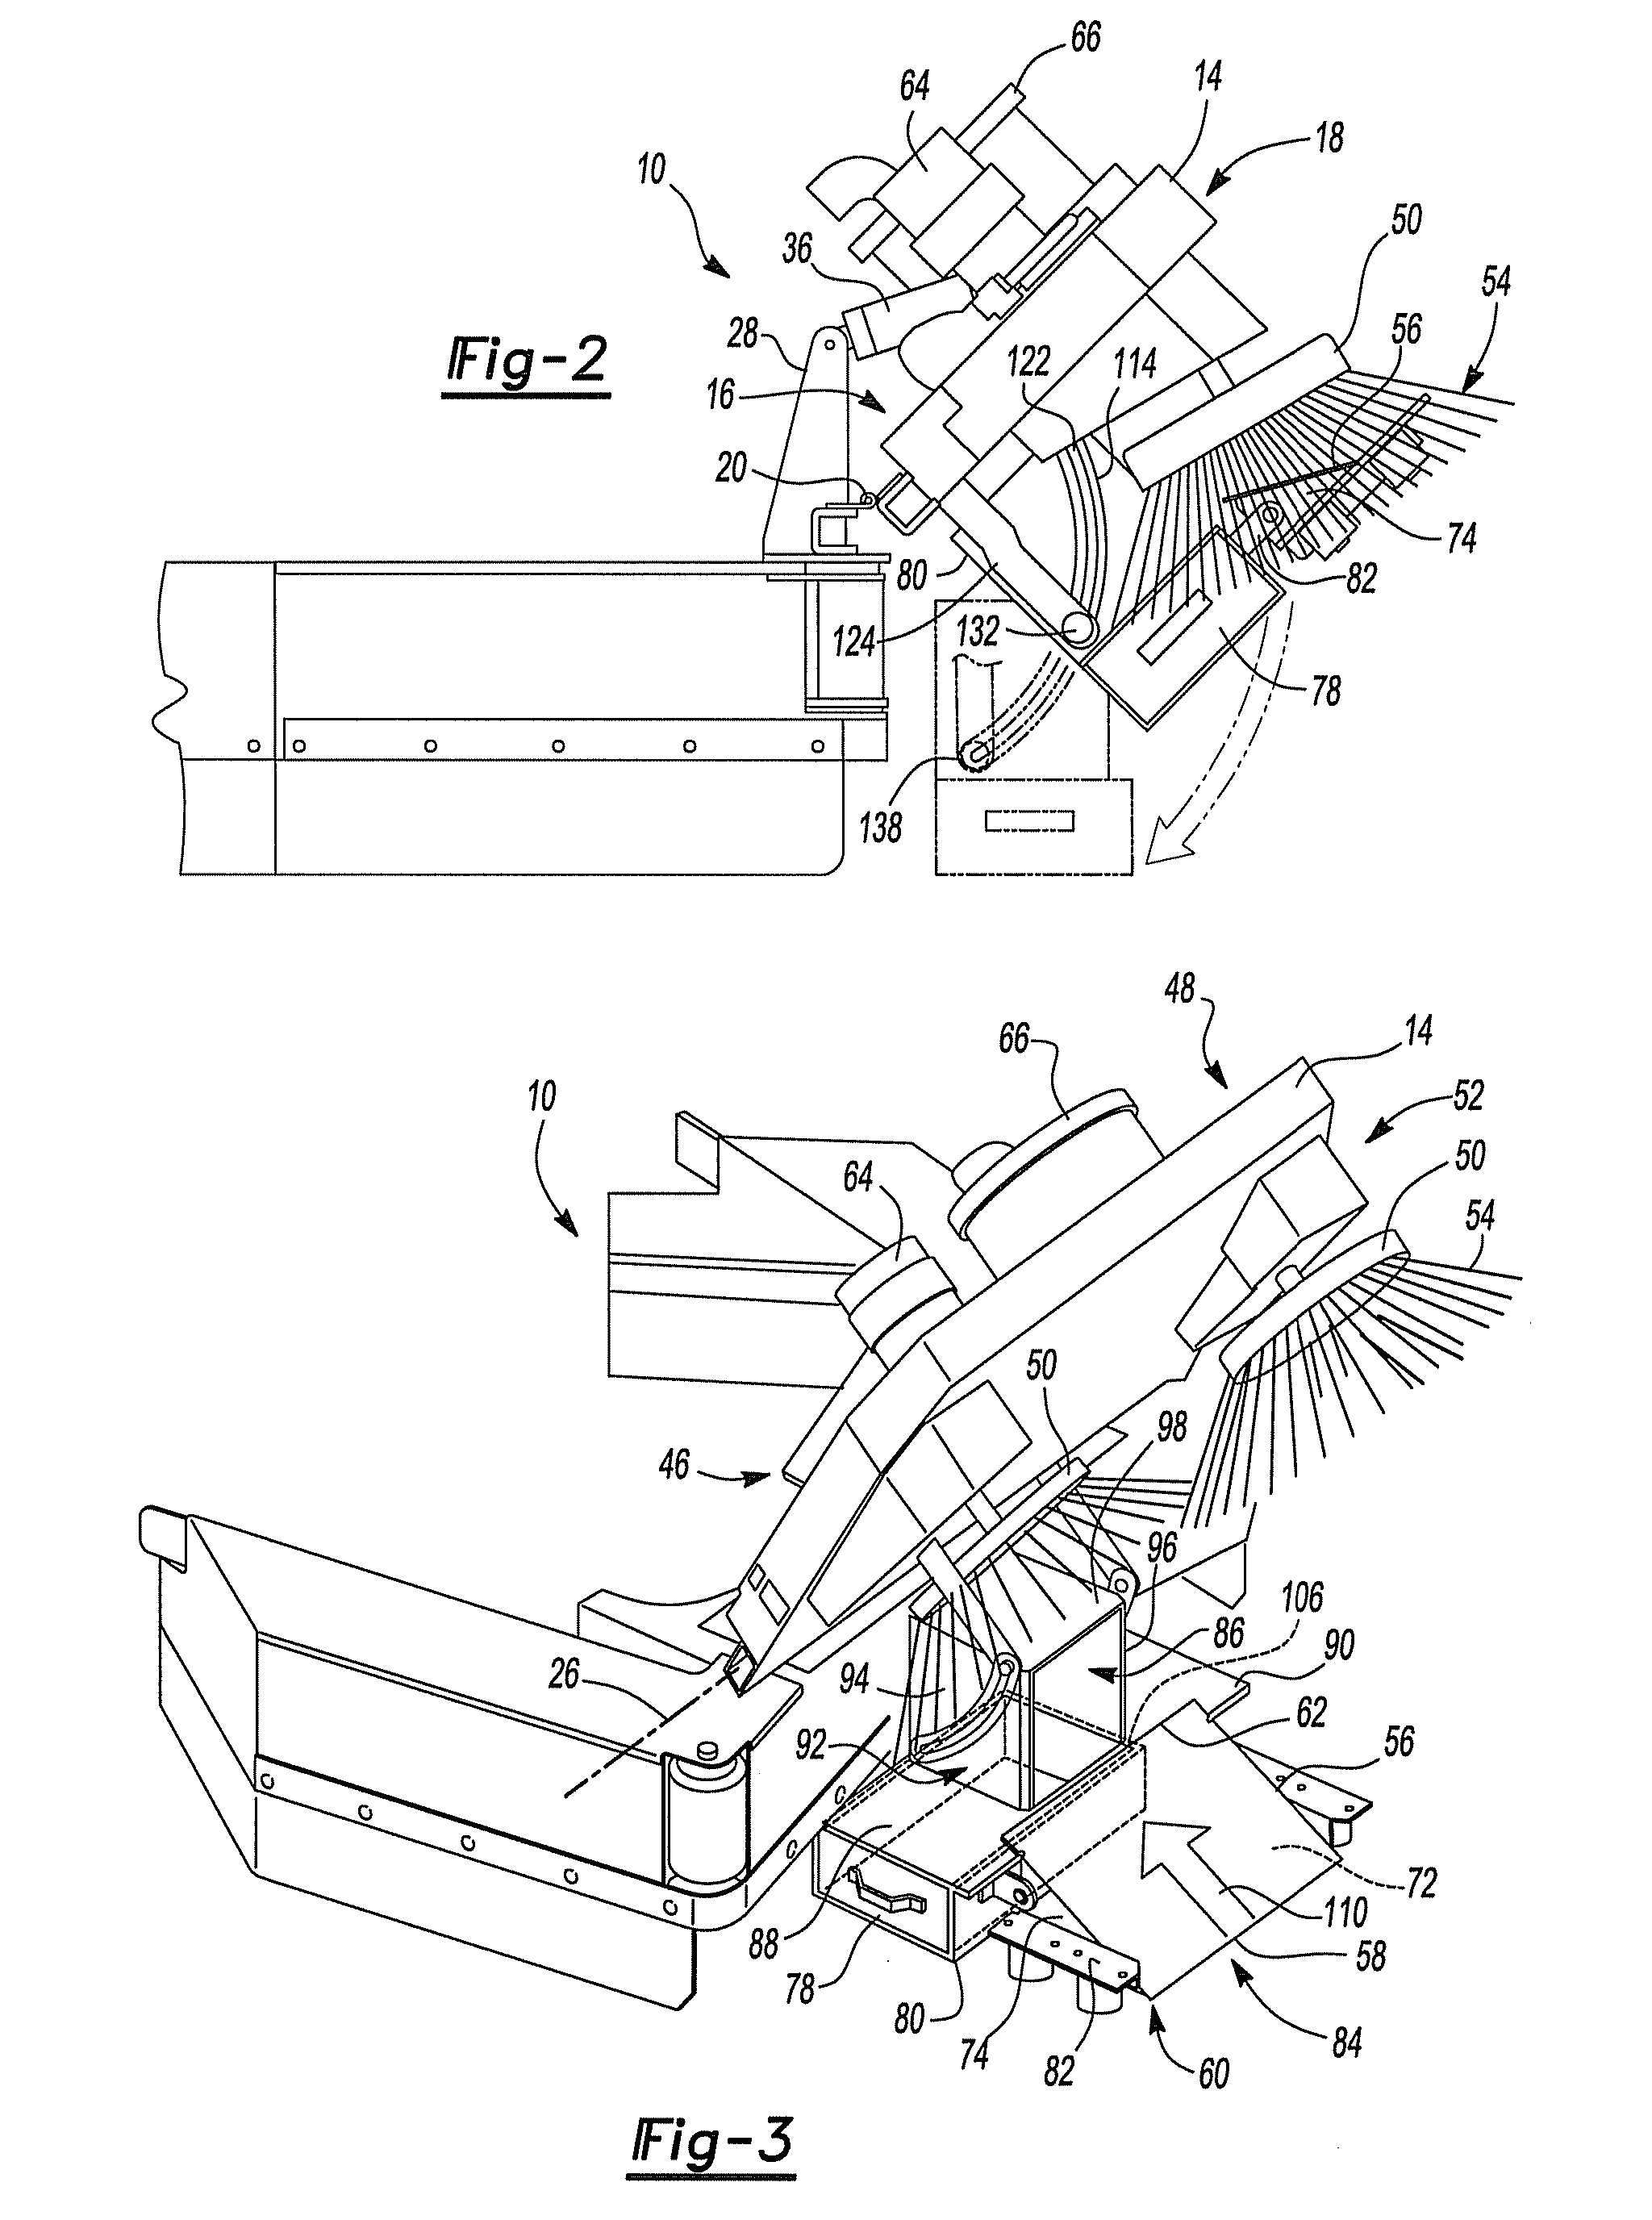 Brush and vacuum assembly and method of use